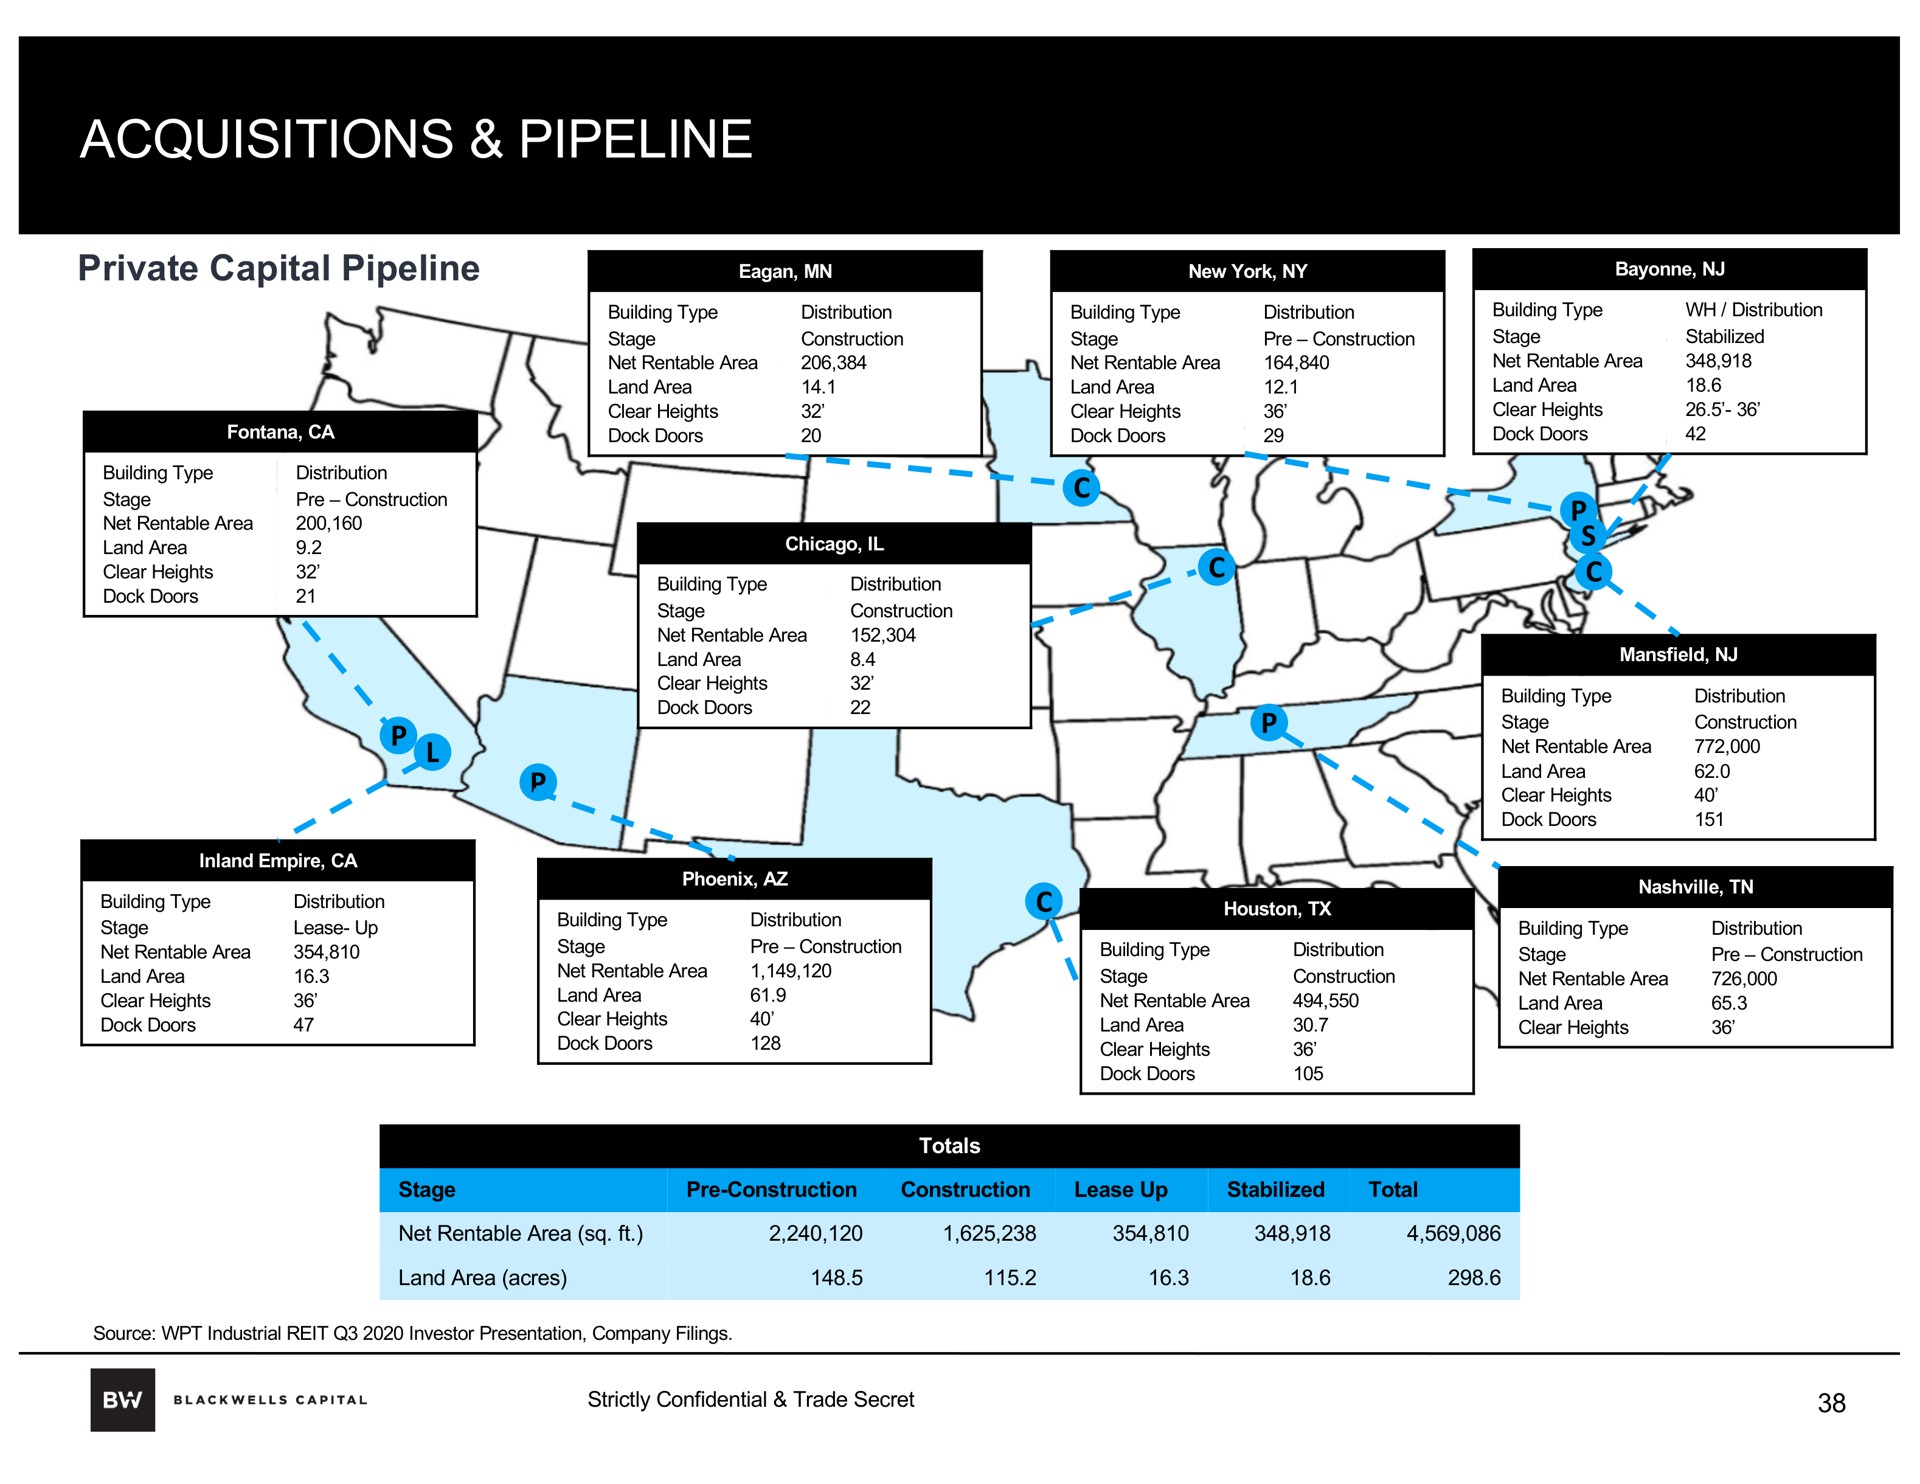 acquisitions pipeline | Blackwells Capital